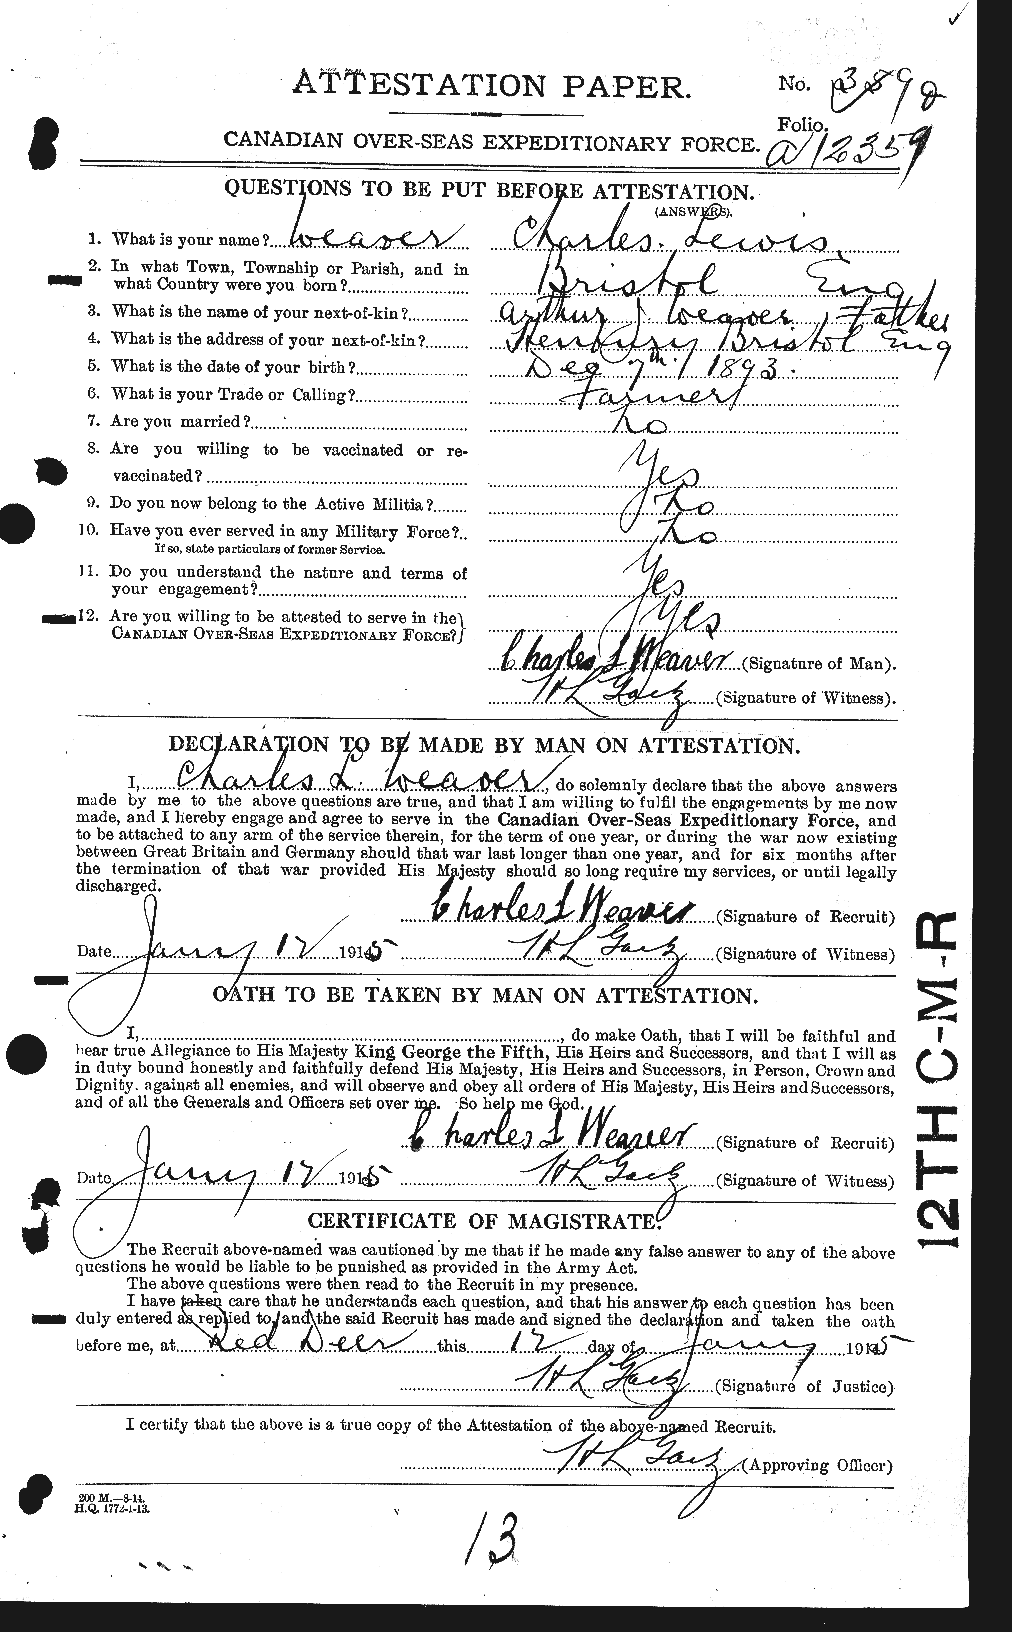 Attestation record: Charles Lewis Weaver